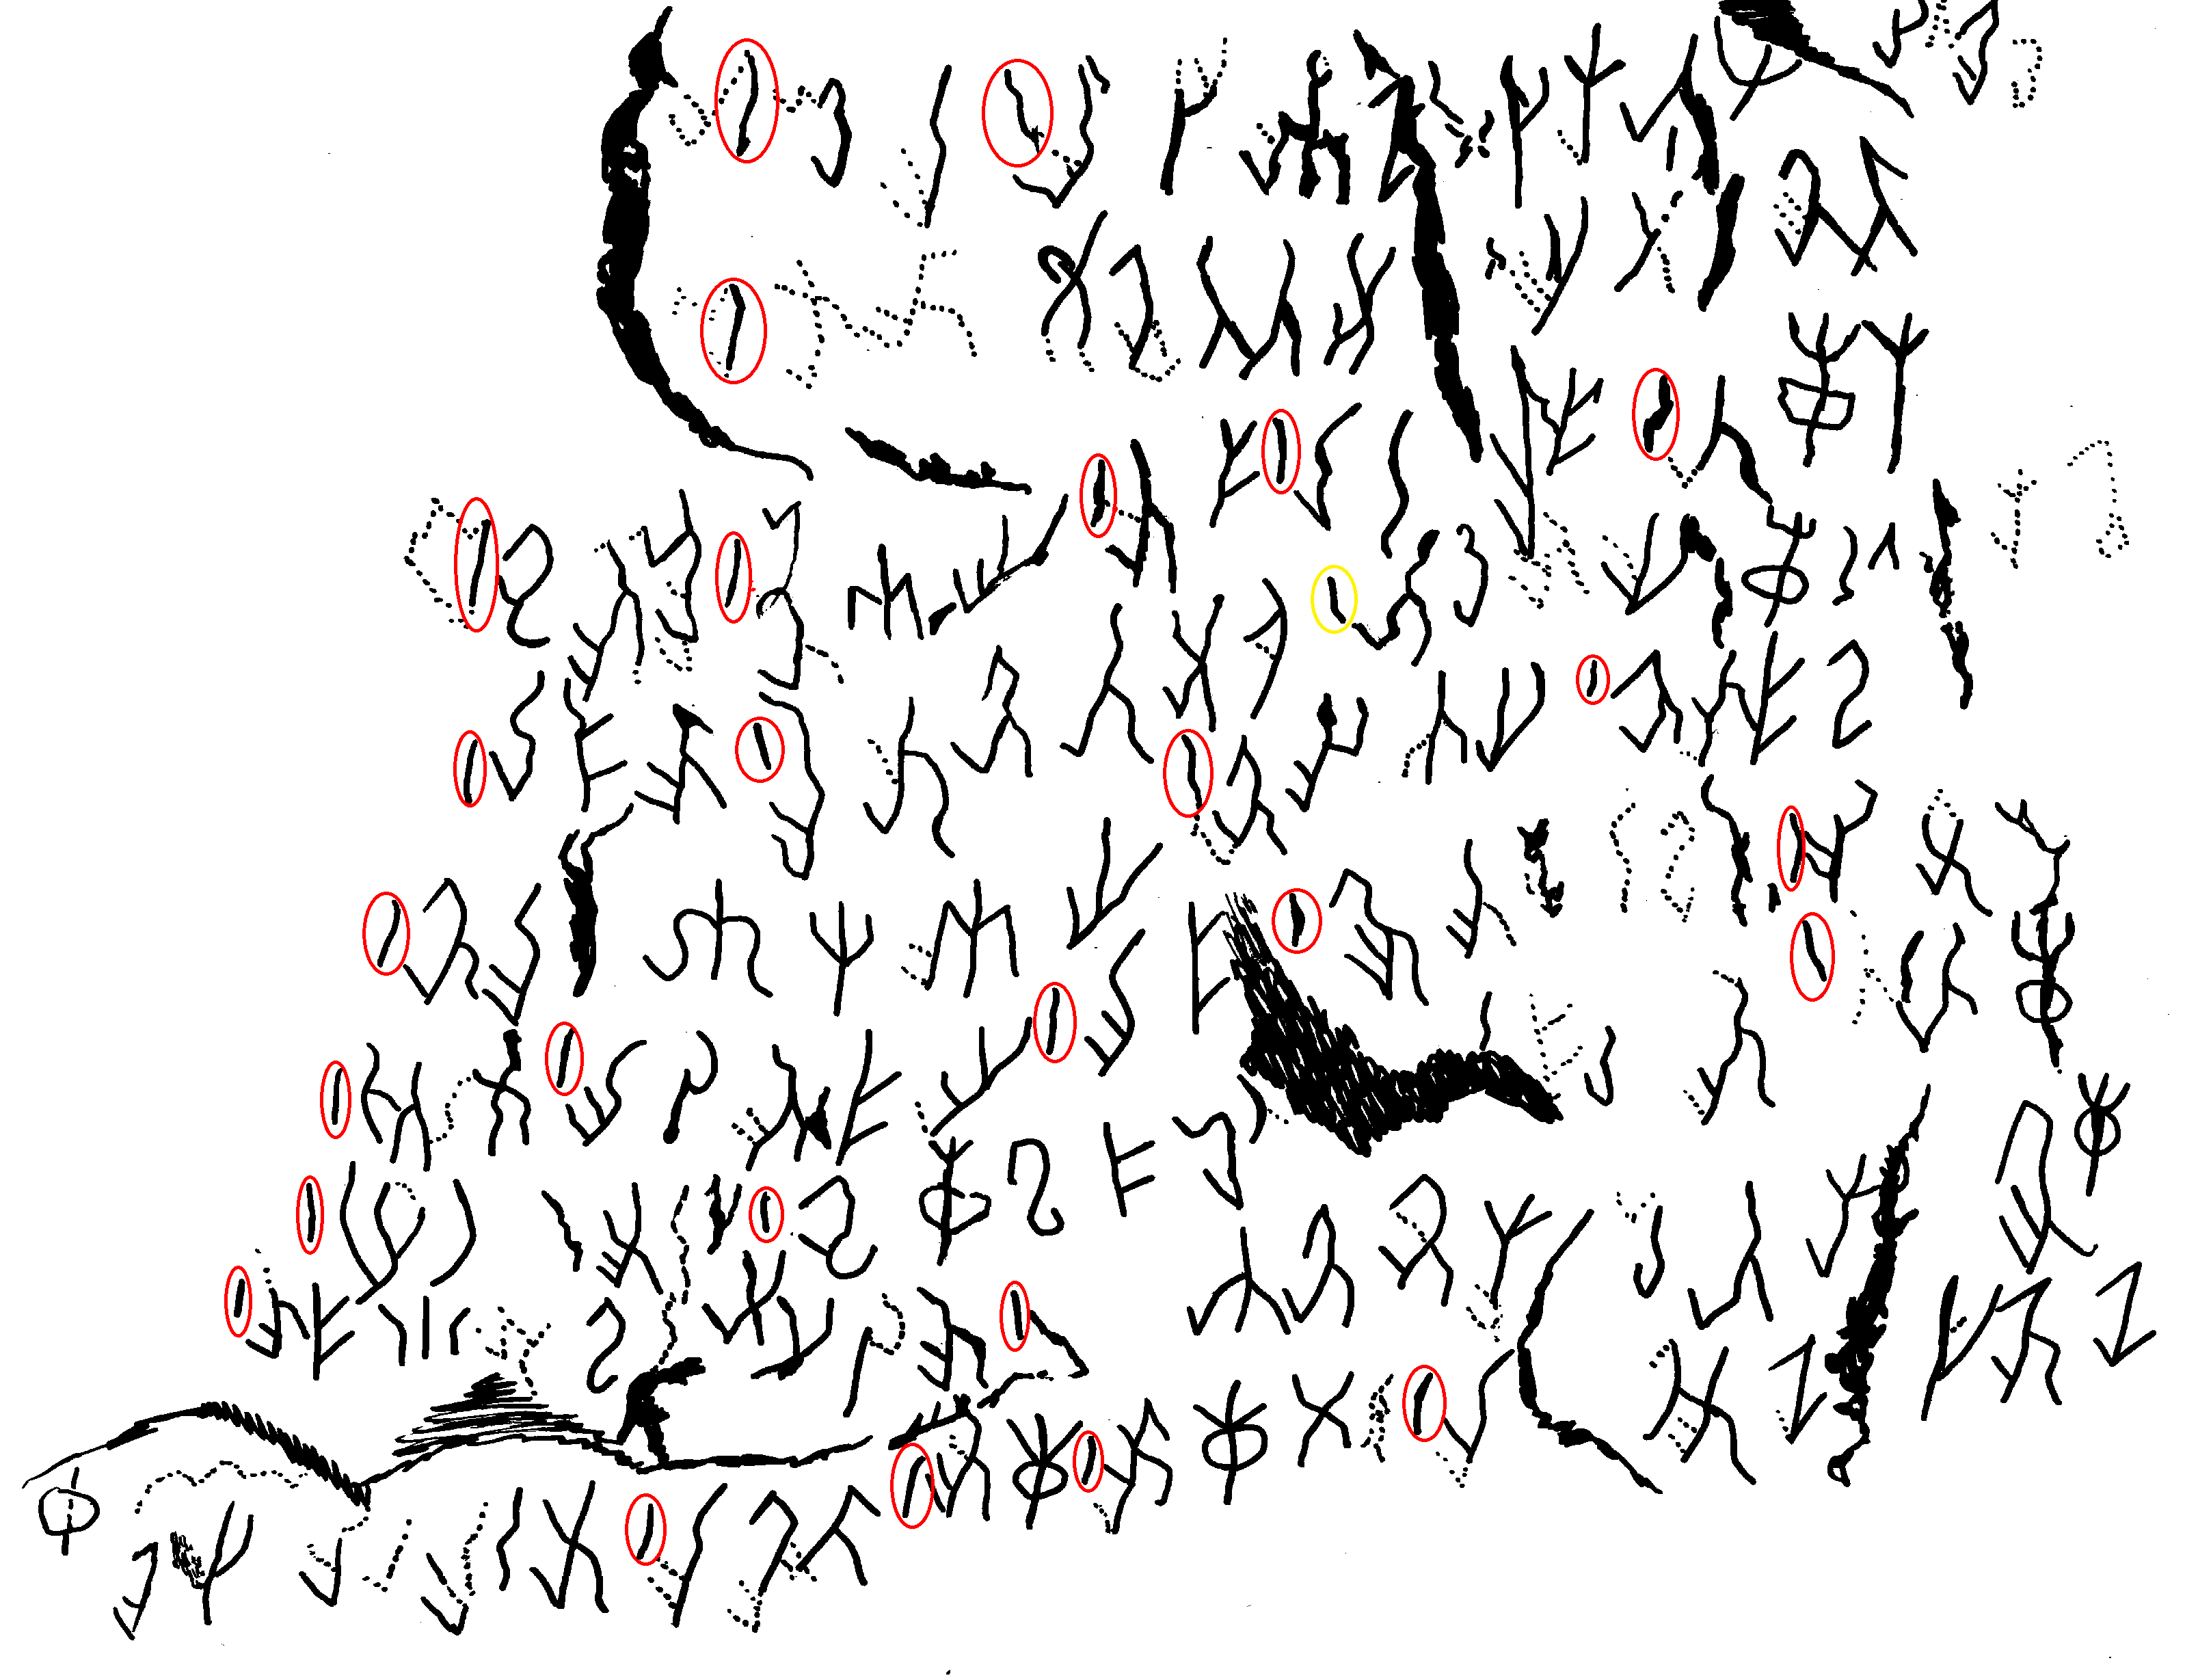 Unknown Kushan Script partially deciphered